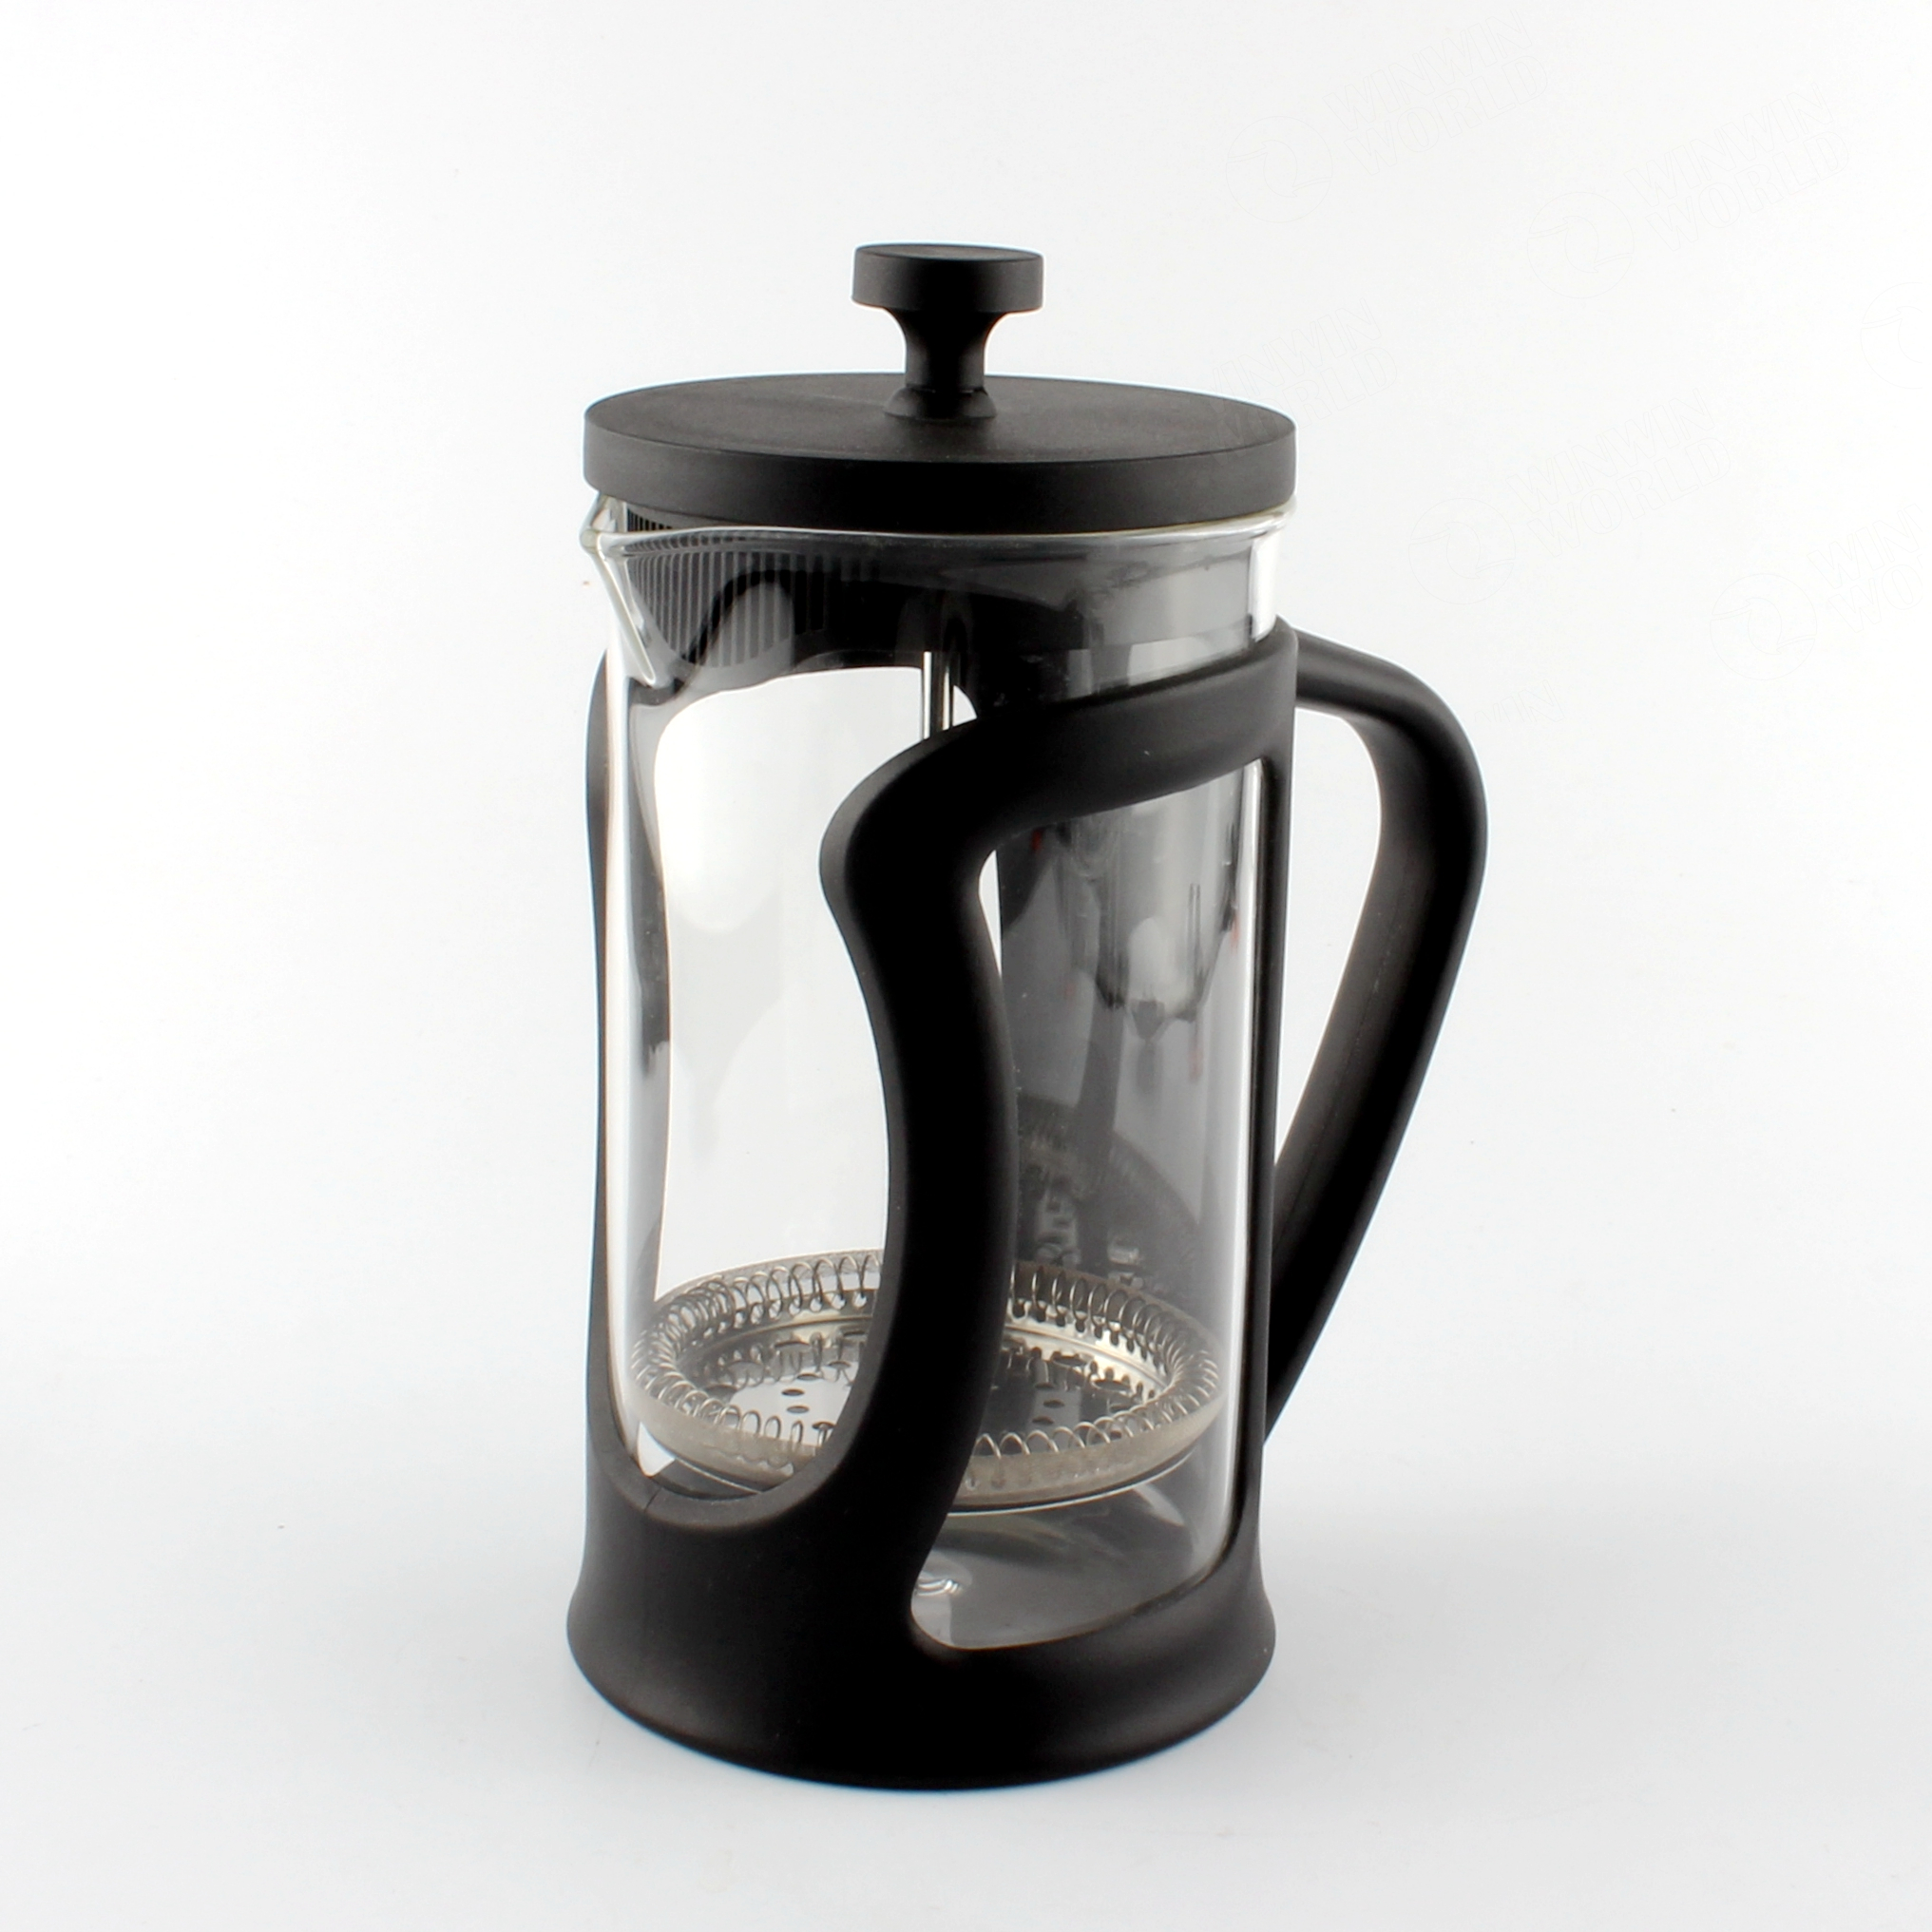 Top Iced Coffee Using Plastic French Press Camping 2019